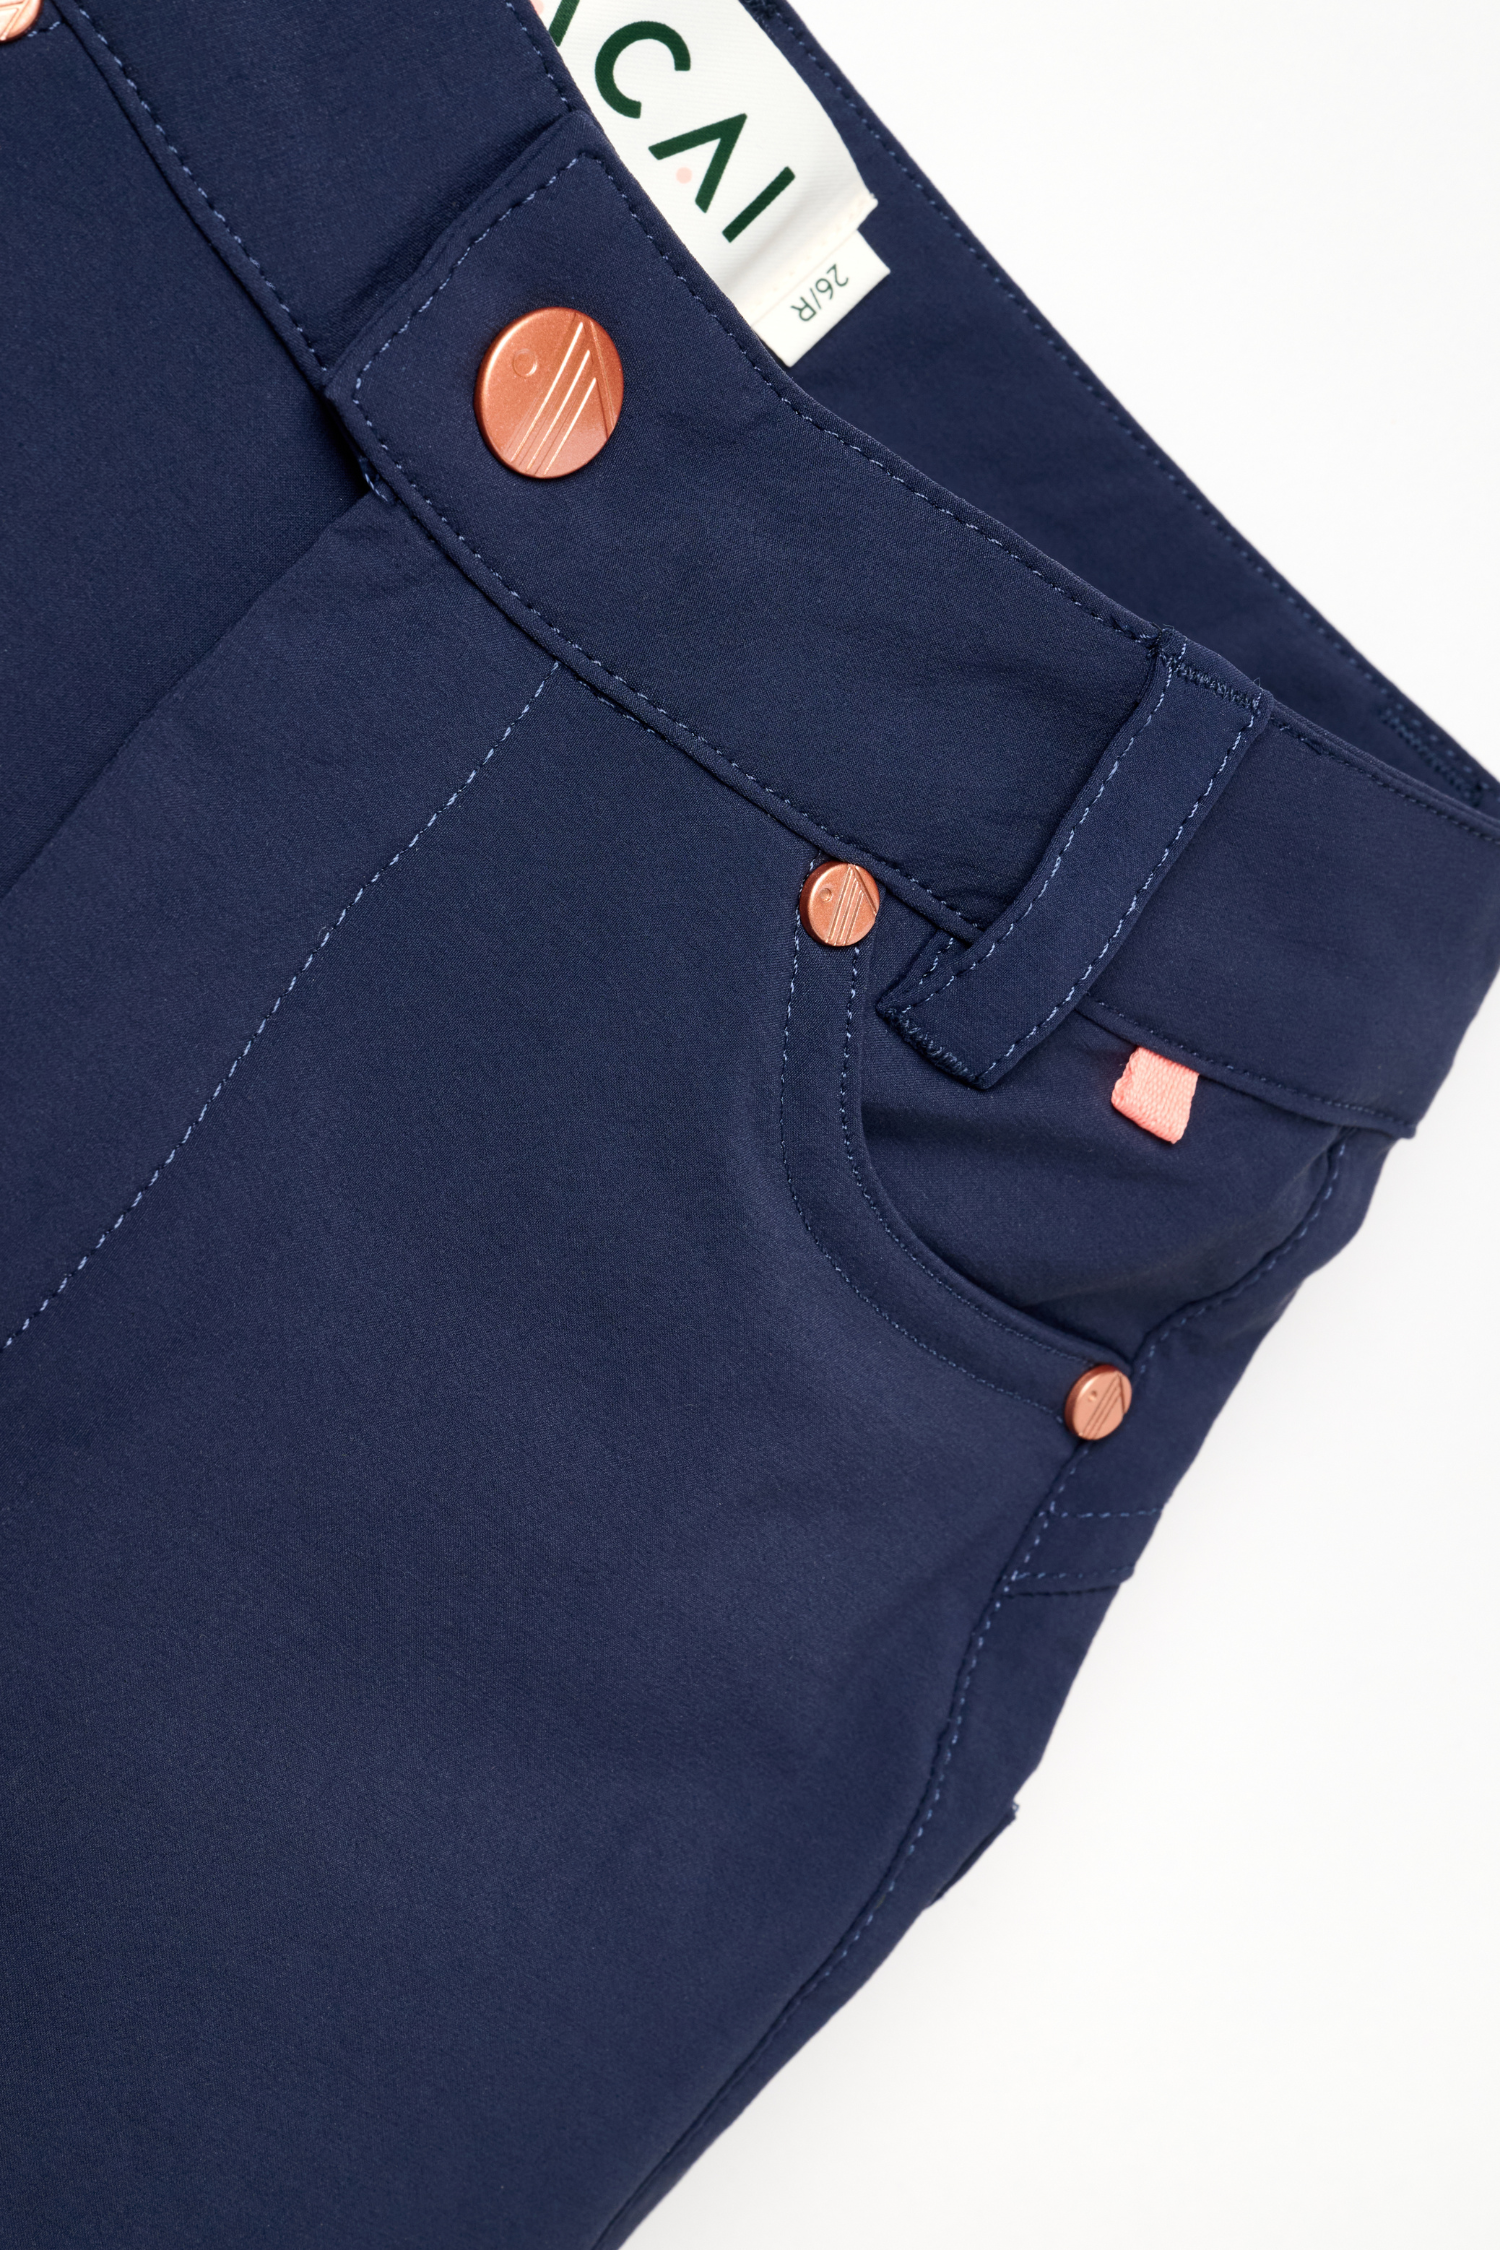 MAX Stretch Skinny Outdoor Trousers - Deep Navy Trousers  